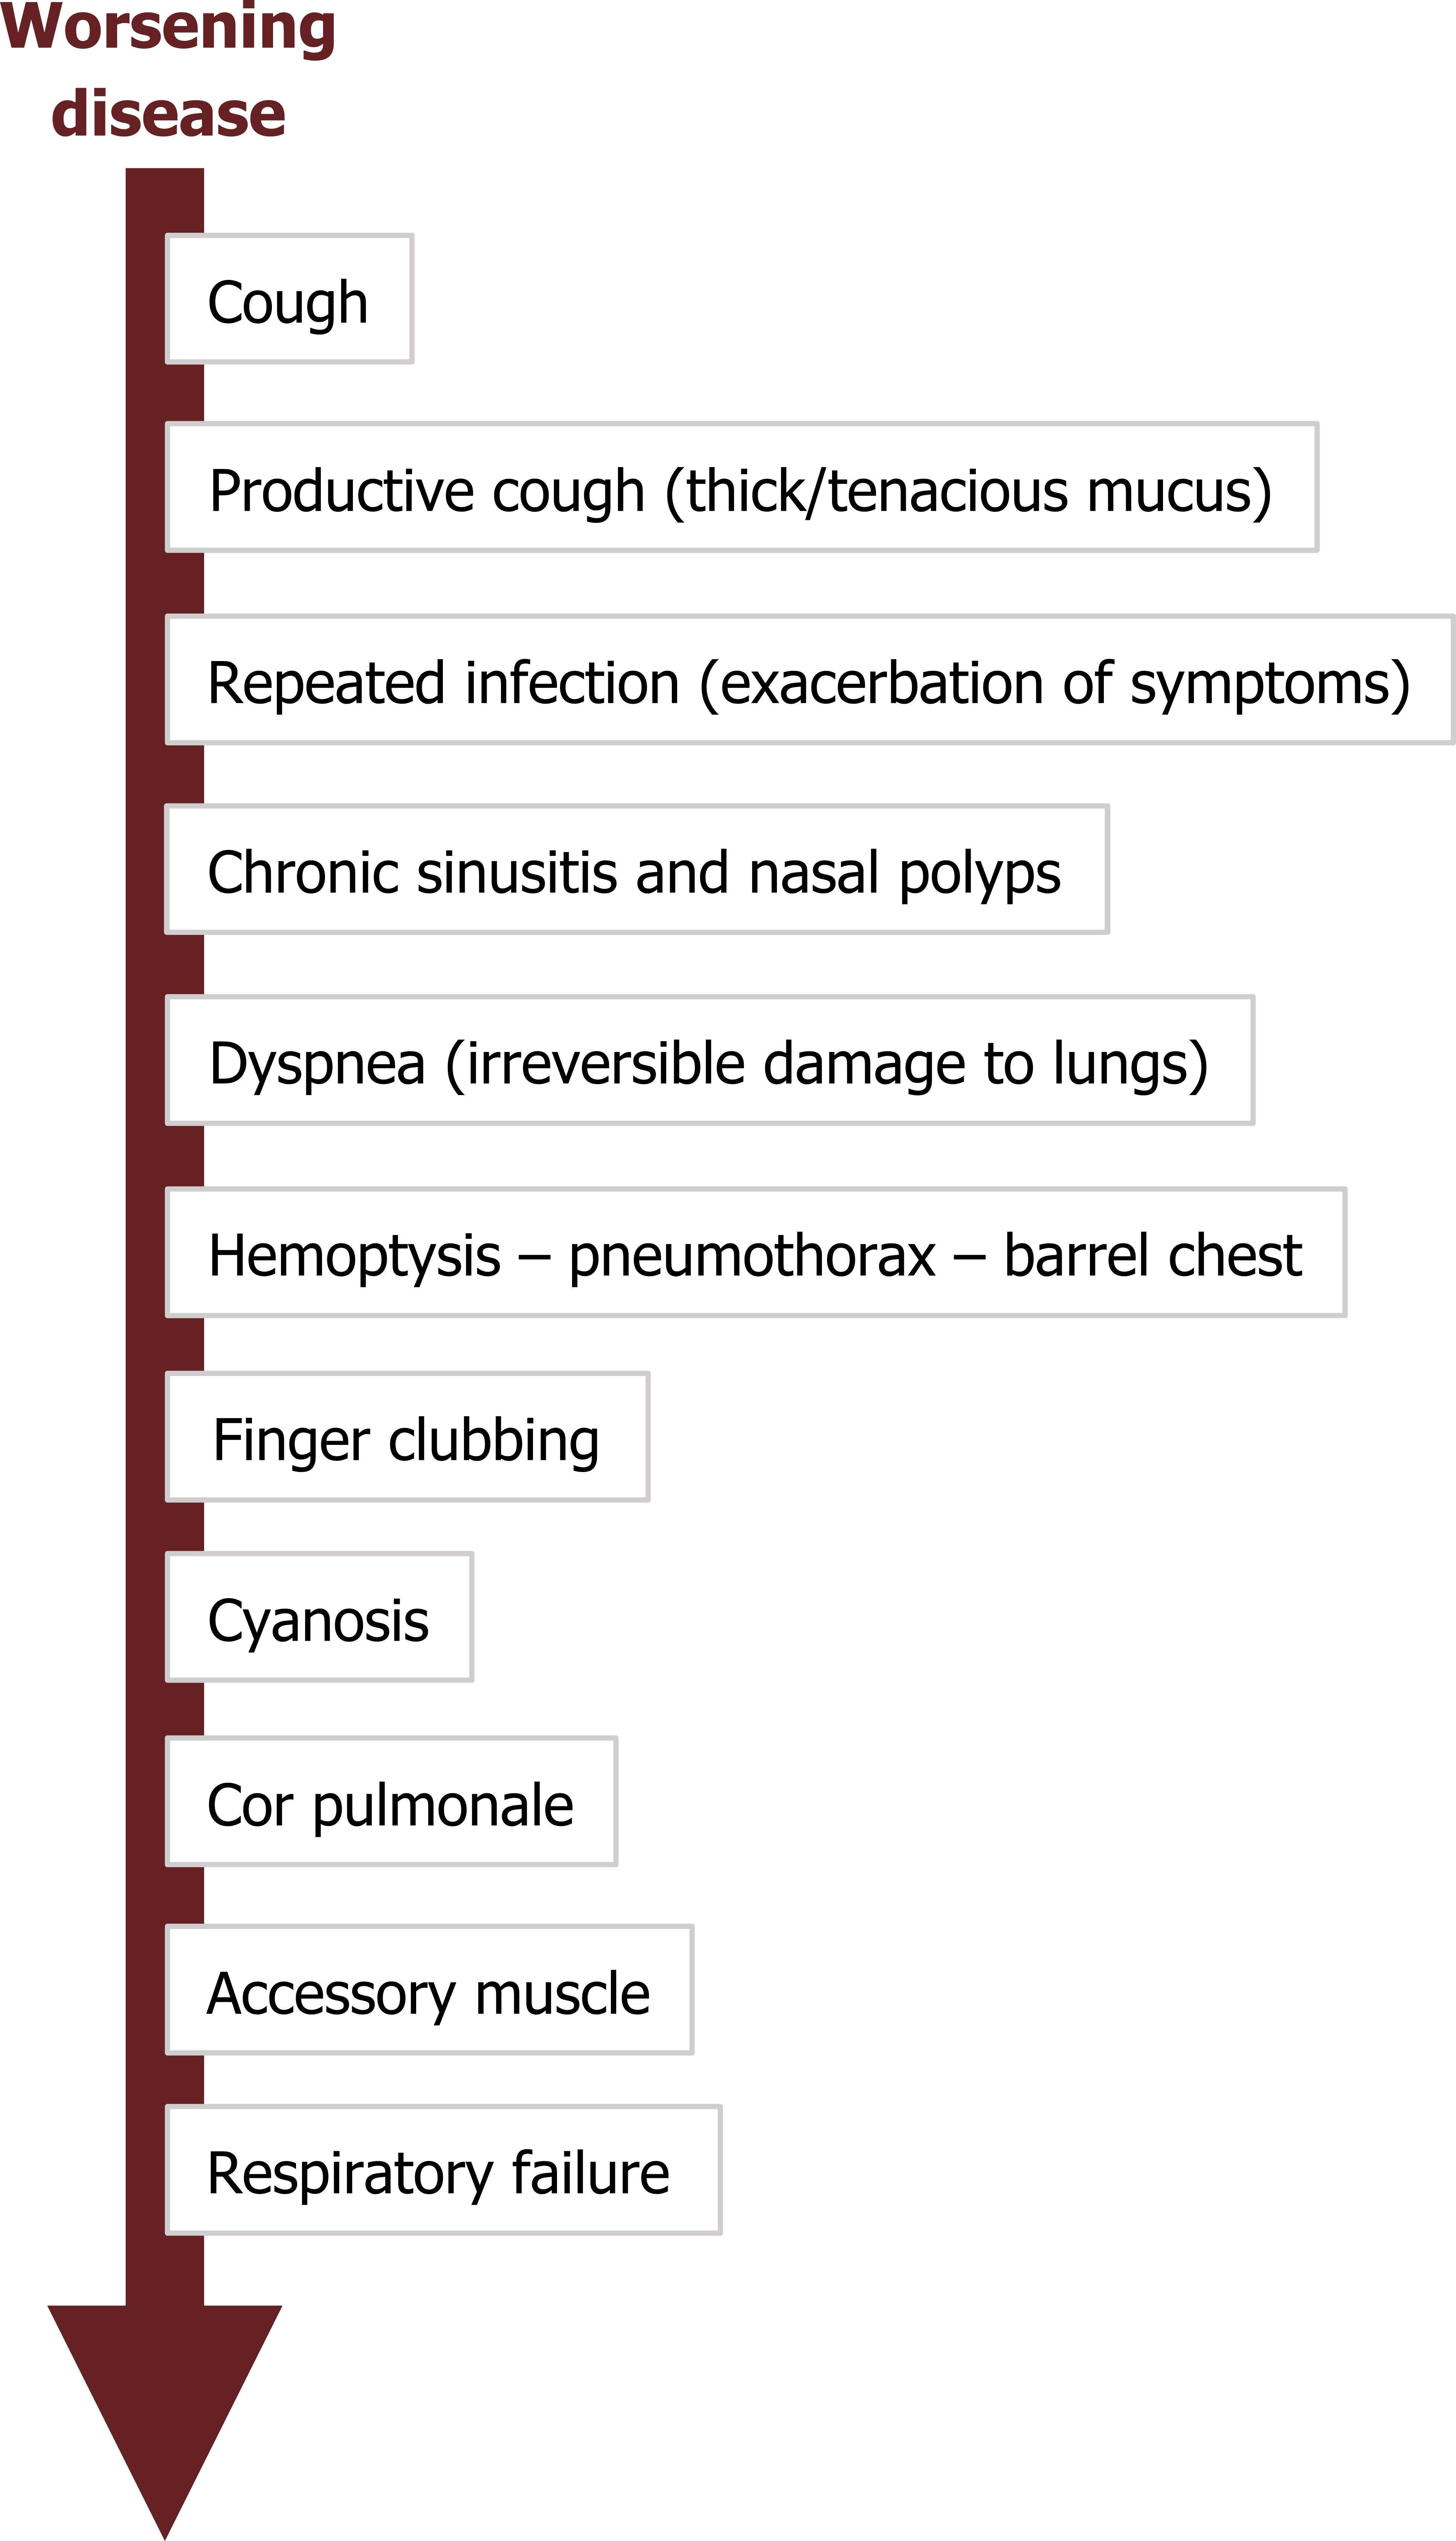 Arrow pointing downward with text worsening disease. From top to bottom: cough, productive cough (thick/tenacious mucus), repeated infection (exacerbation of symptoms), chronic sinusitis and nasal polyps, dyspnea (irreversible damage to lungs), hemoptysis - pneumothorax - barrel chest, finger clubbing, cyanosis, cor pulmonale, accessory muscle, respiratory failure